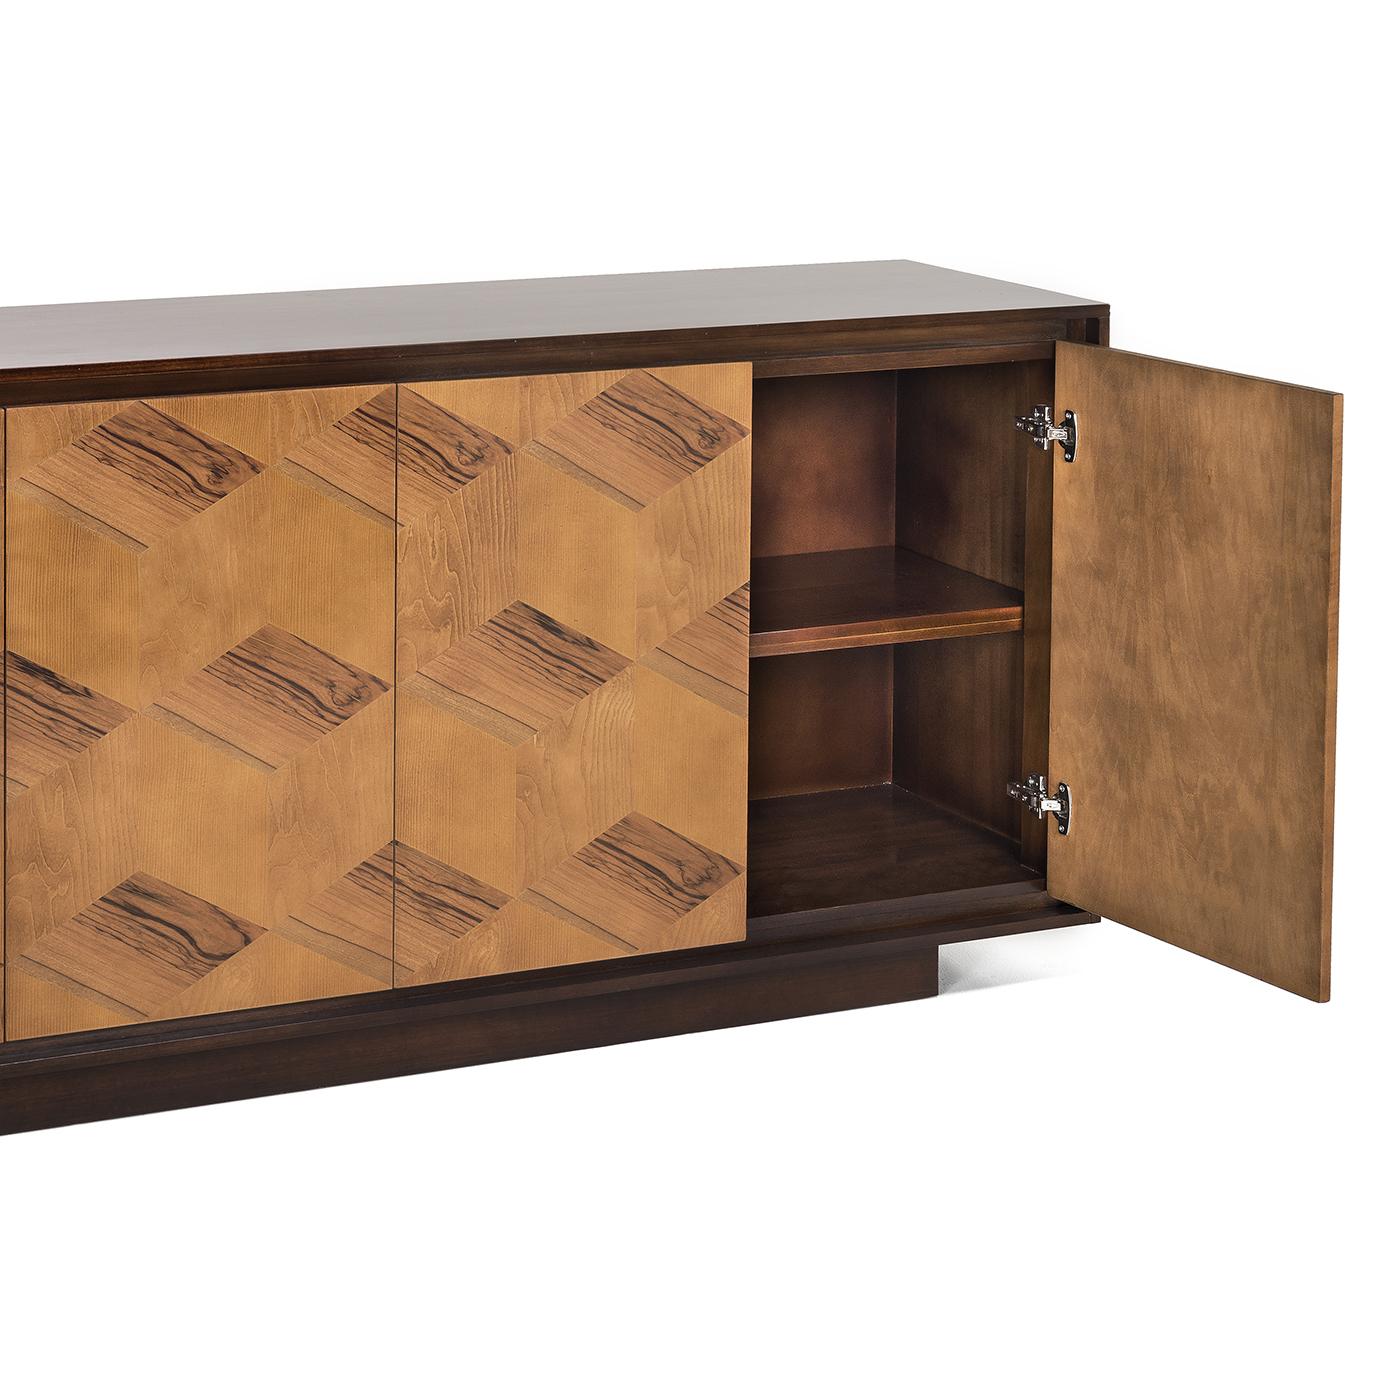 This stunning sideboard will make a sophisticated statement in a modern home, where it will provide precious storage space, while adding a stunning decorative accent in a dining room or living room or even a large entryway. Its structure combines